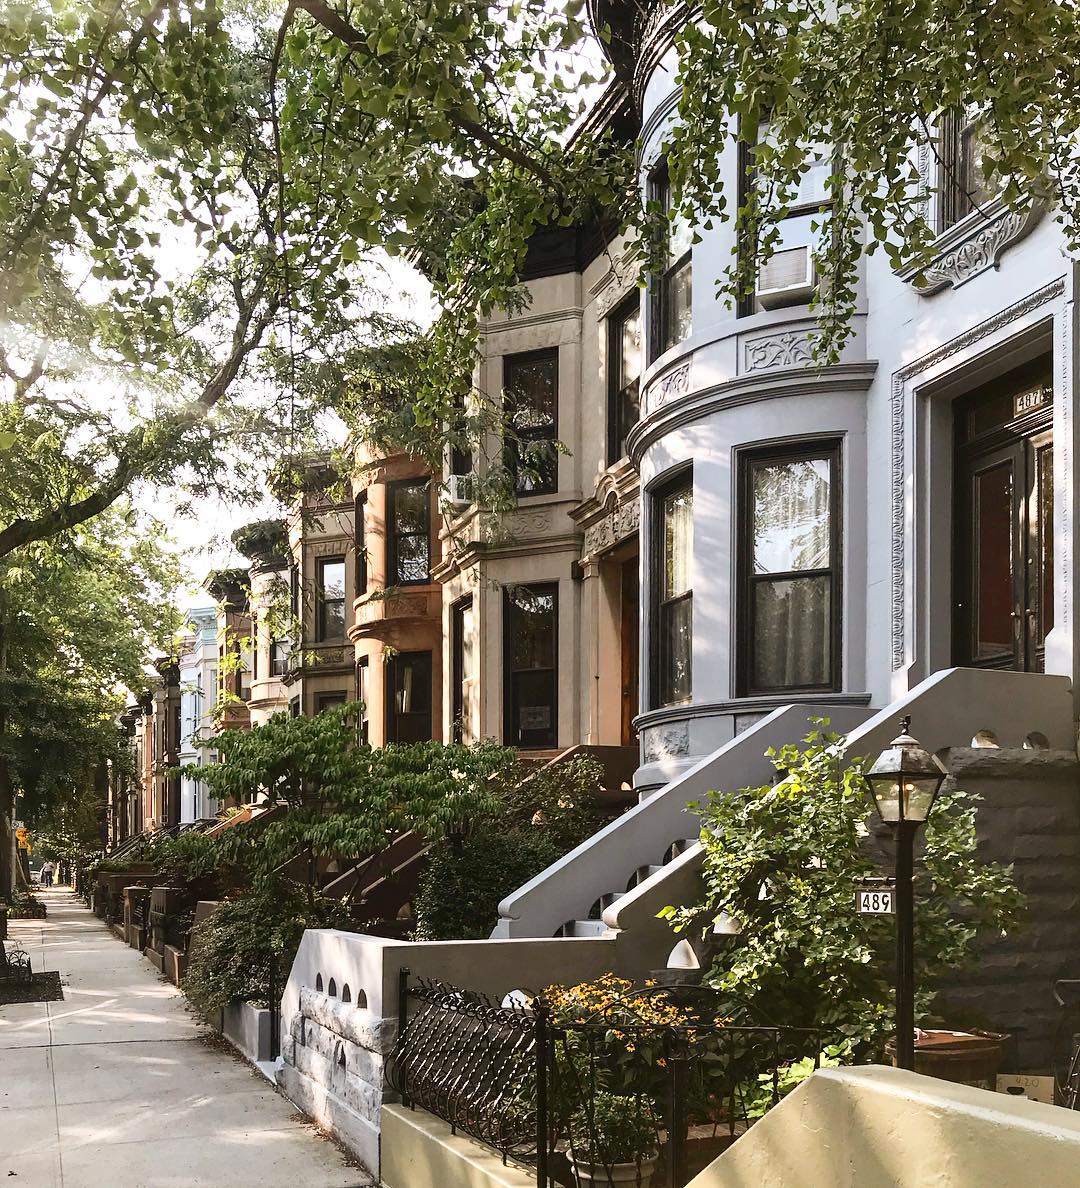 Looking at a row of brownstones from the sidewalk Photo by Instagram user @madufault